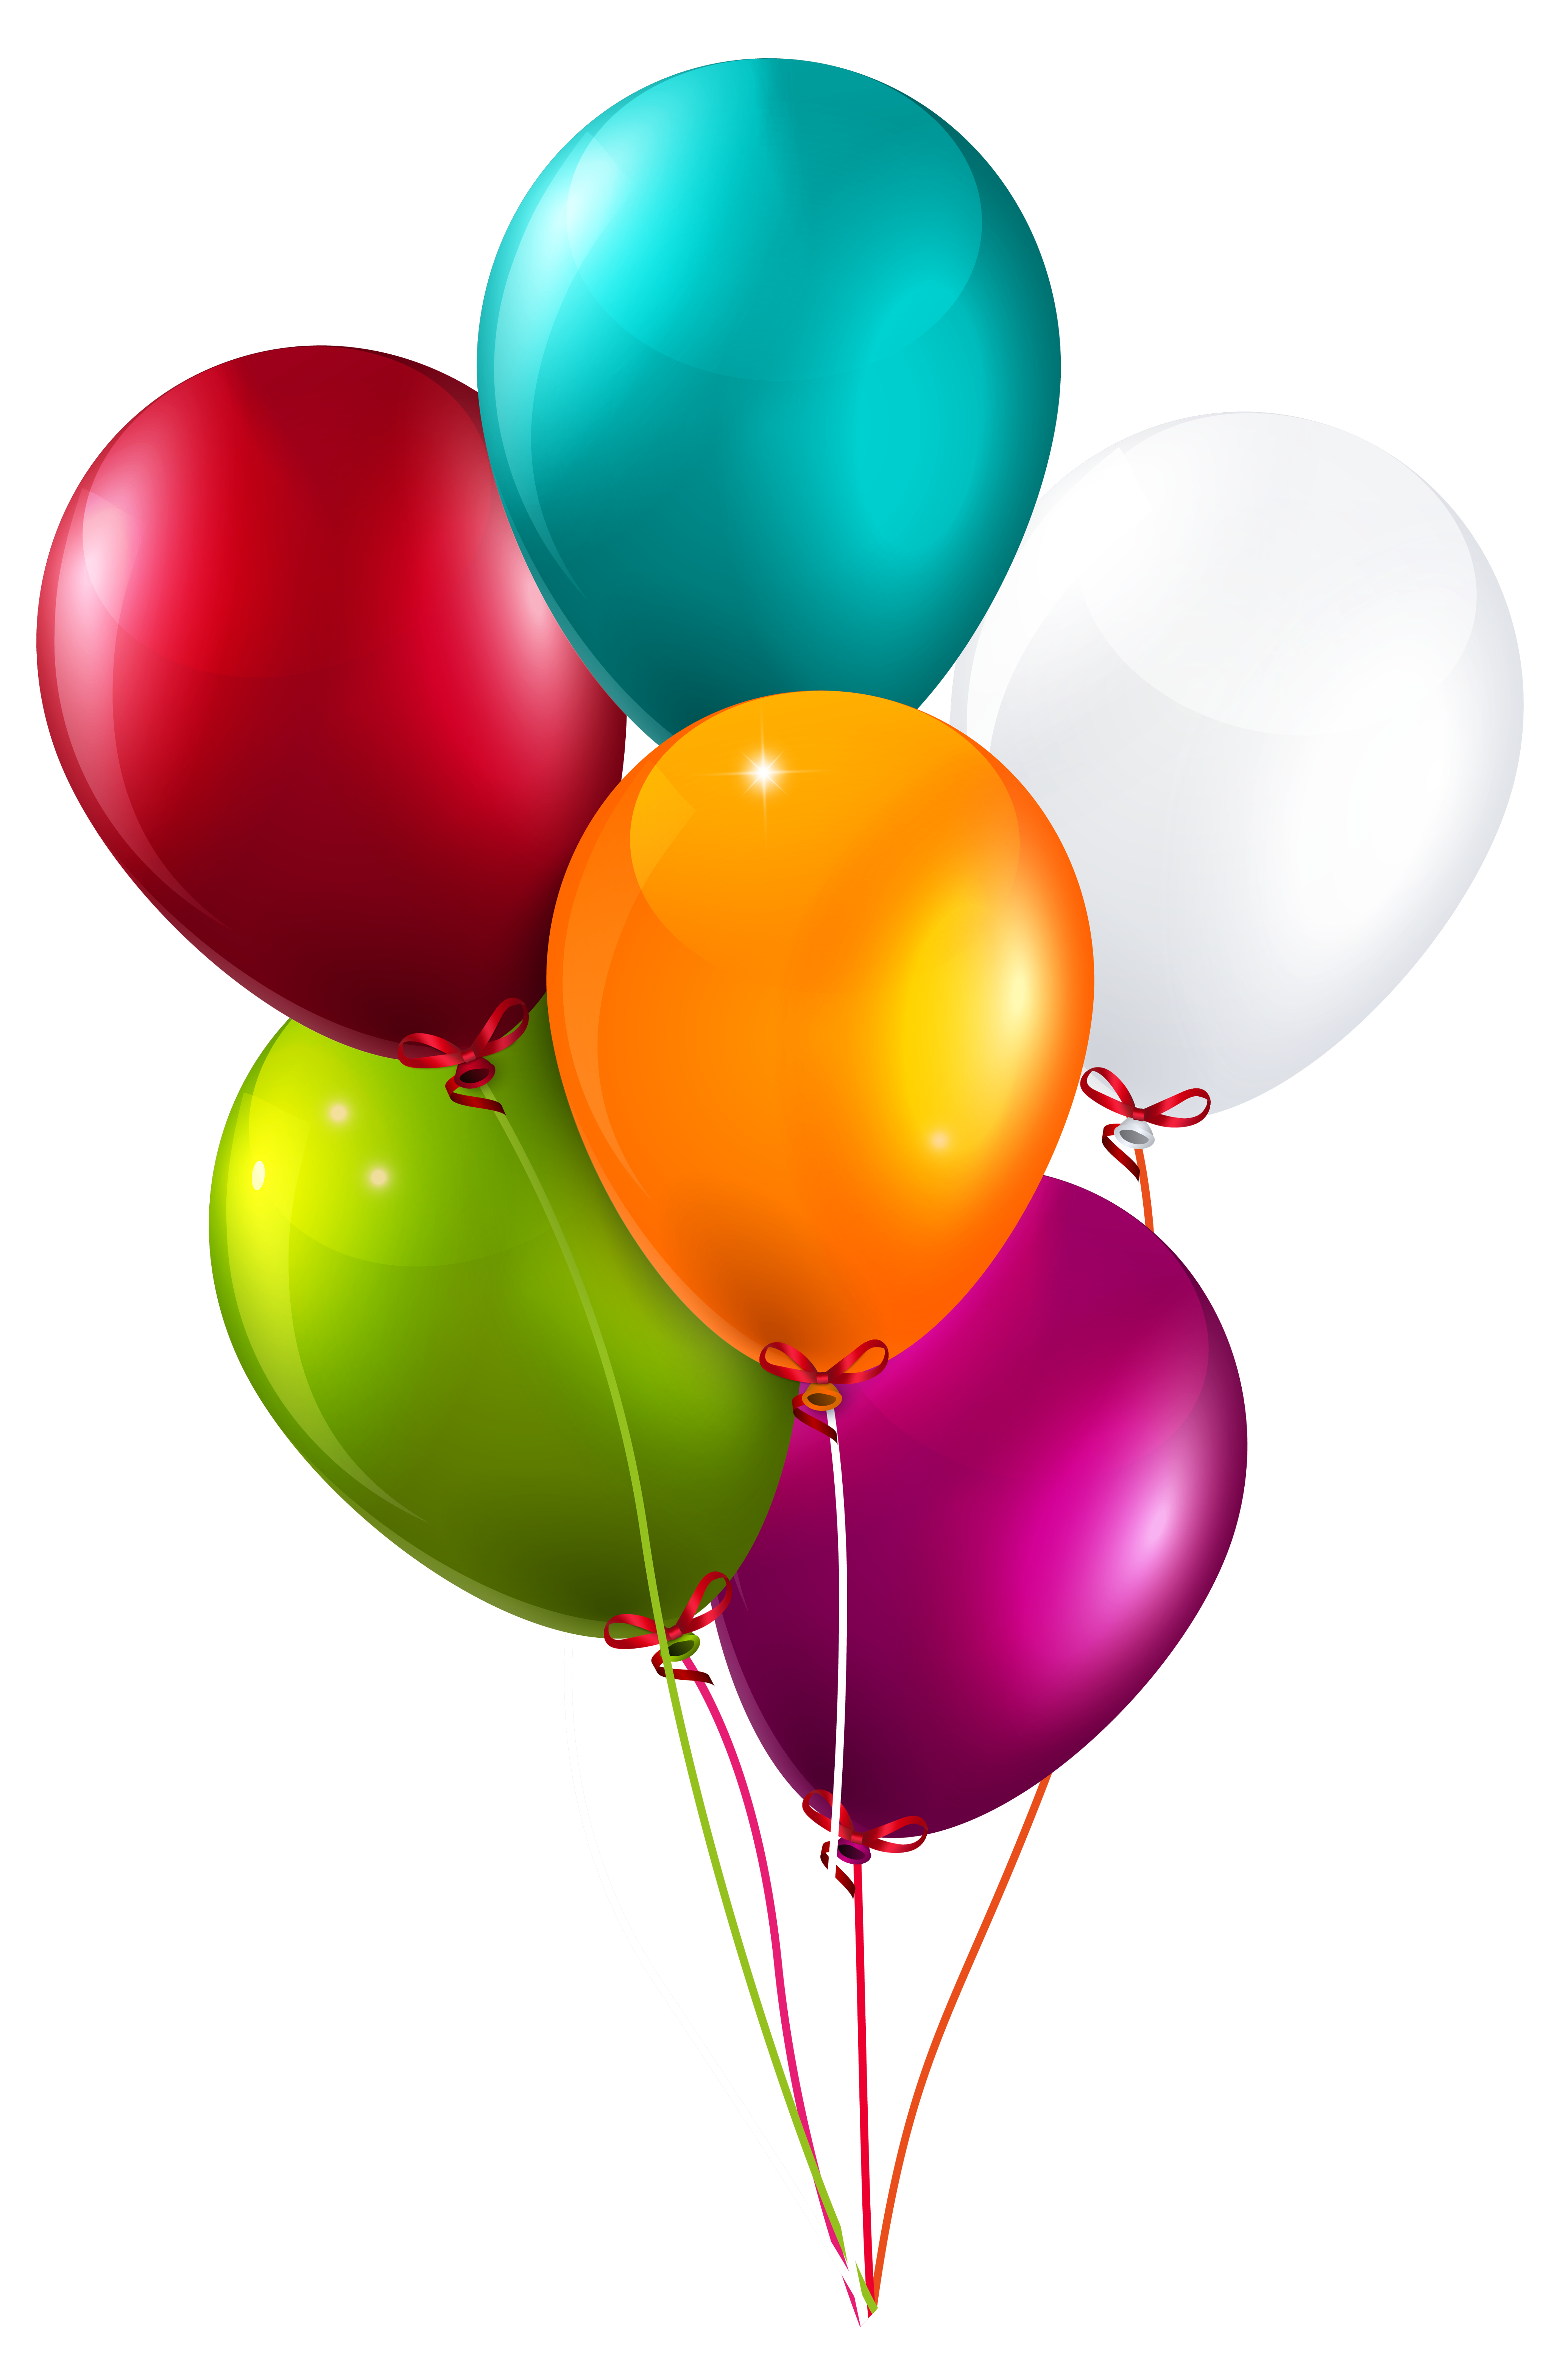 Colorful Balloons Bunch Large PNG Clipart Image